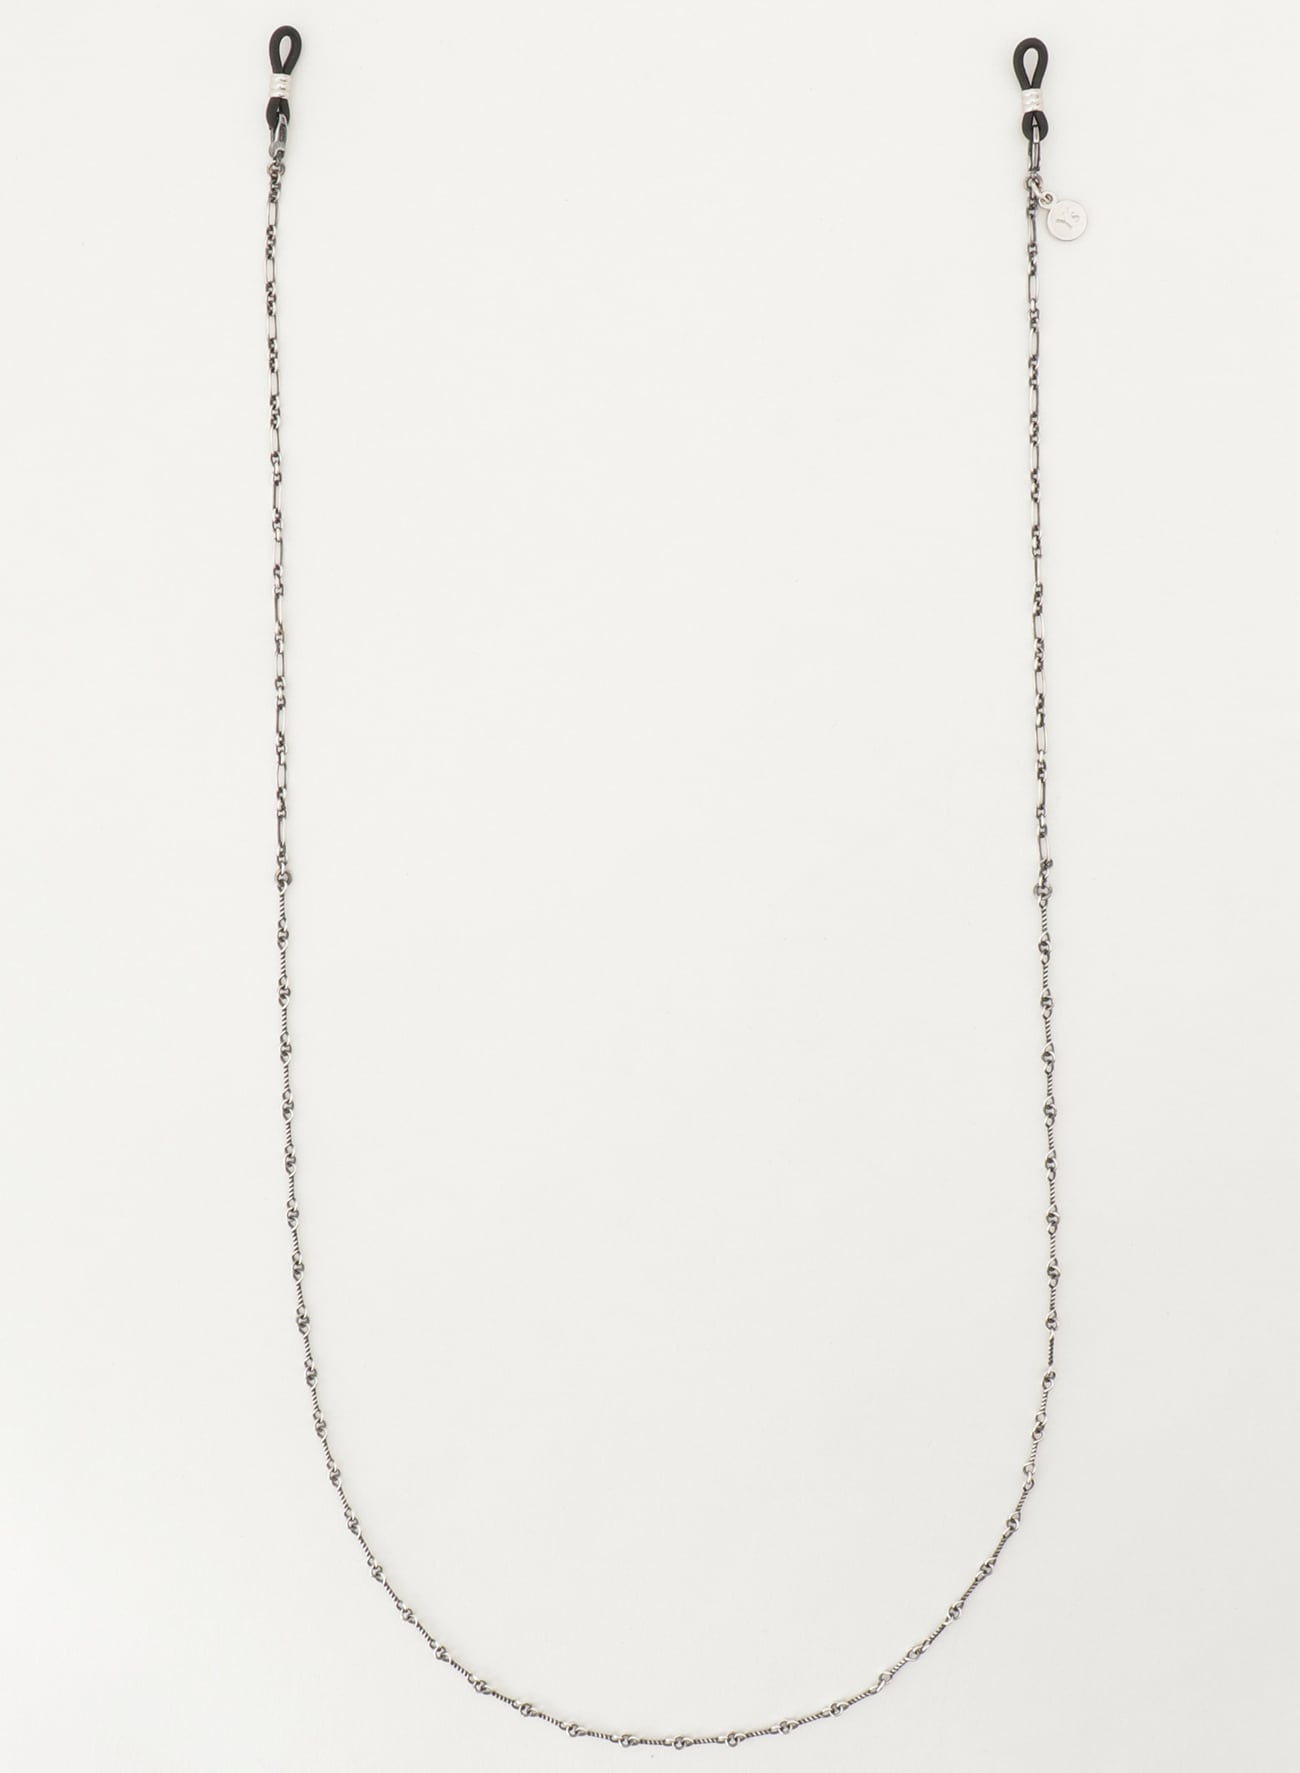 SILVER 925 3 WAYS CHAIN NECKLACE S(FREE SIZE Silver): Y's｜THE